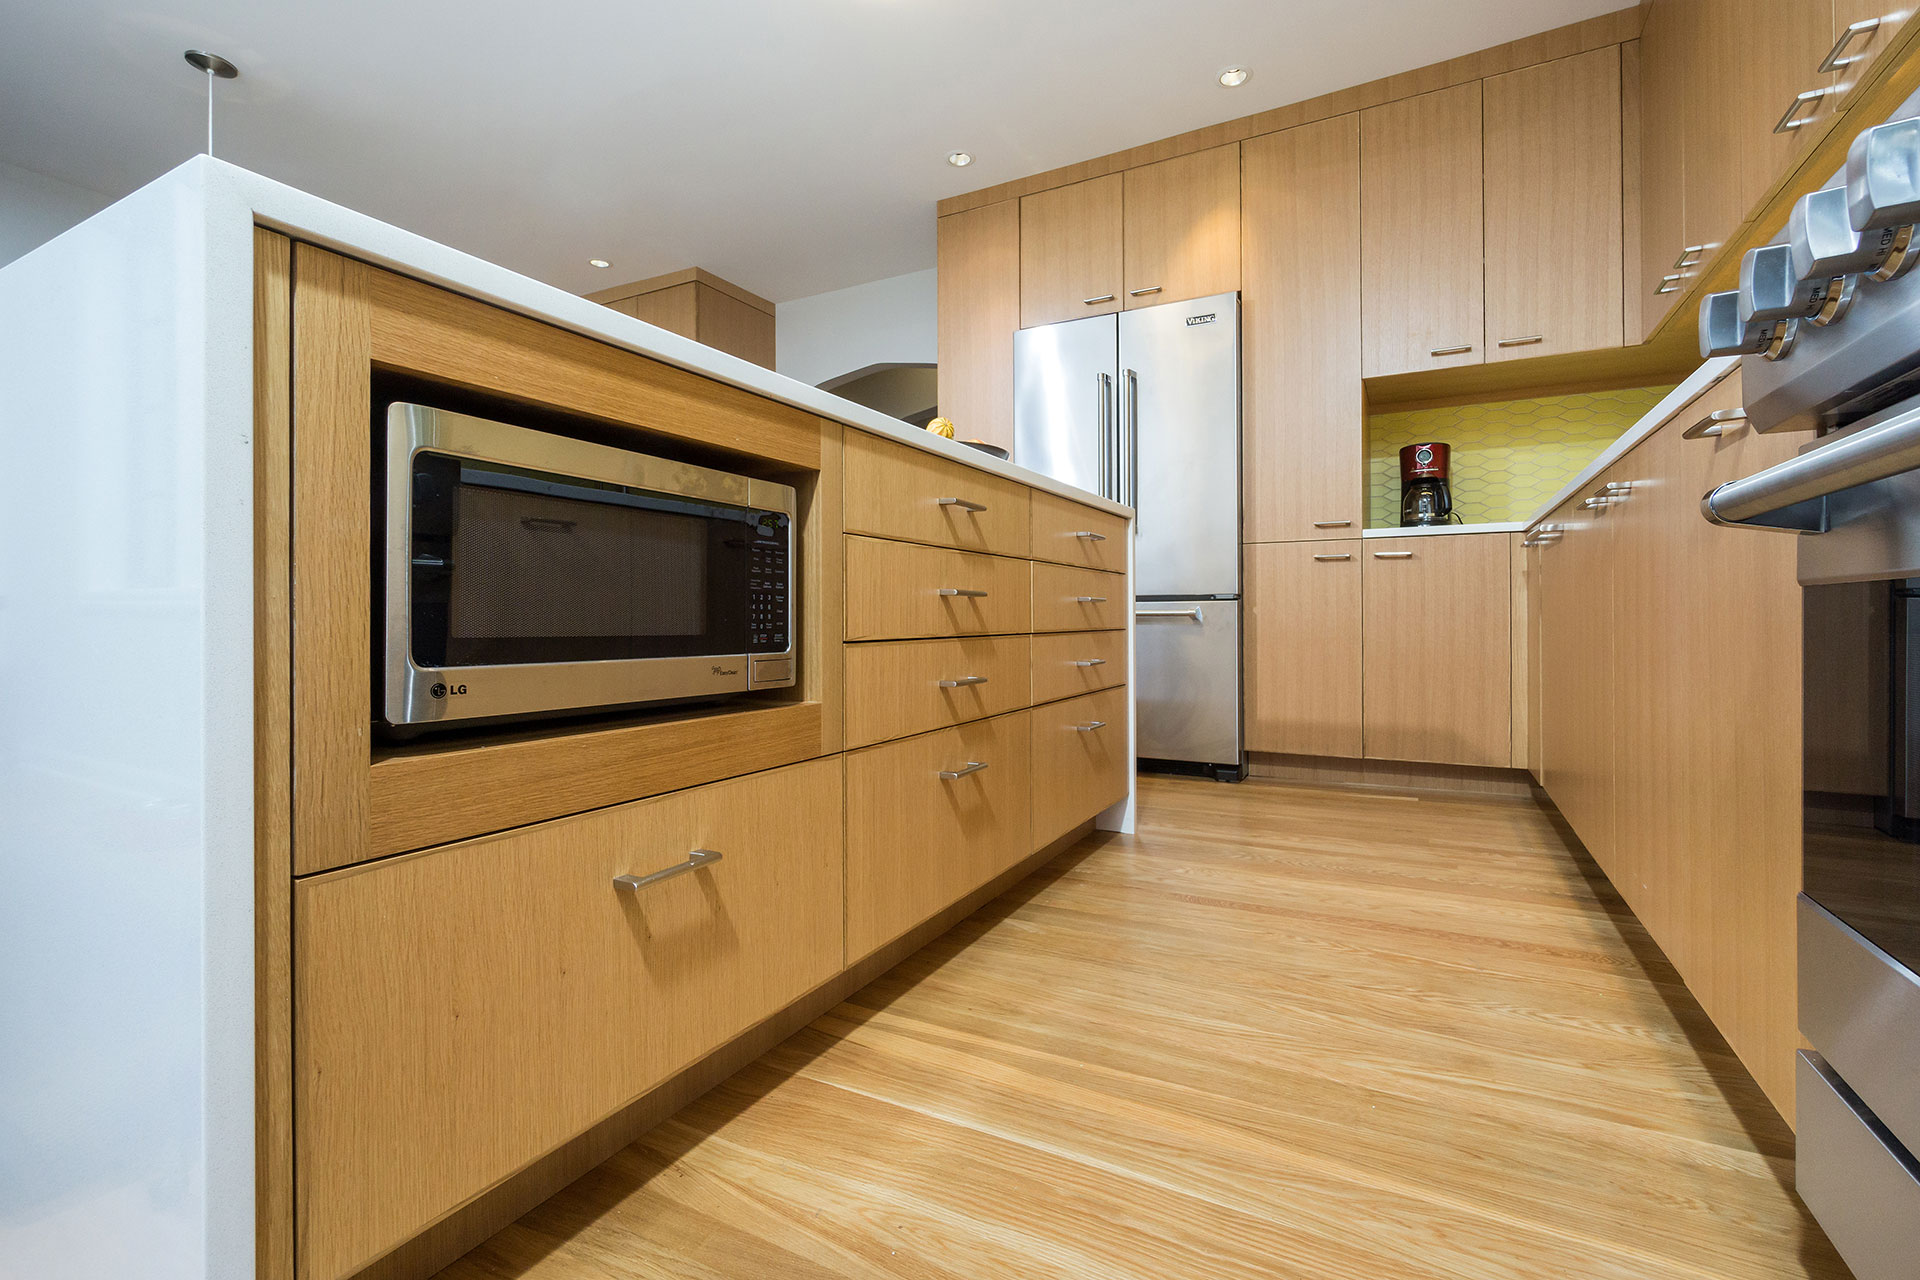 At the Alameda Modern, the renovated kitchen features an island that acts as a buffer between the prep and dining areas. The island houses a niche for a microwave.